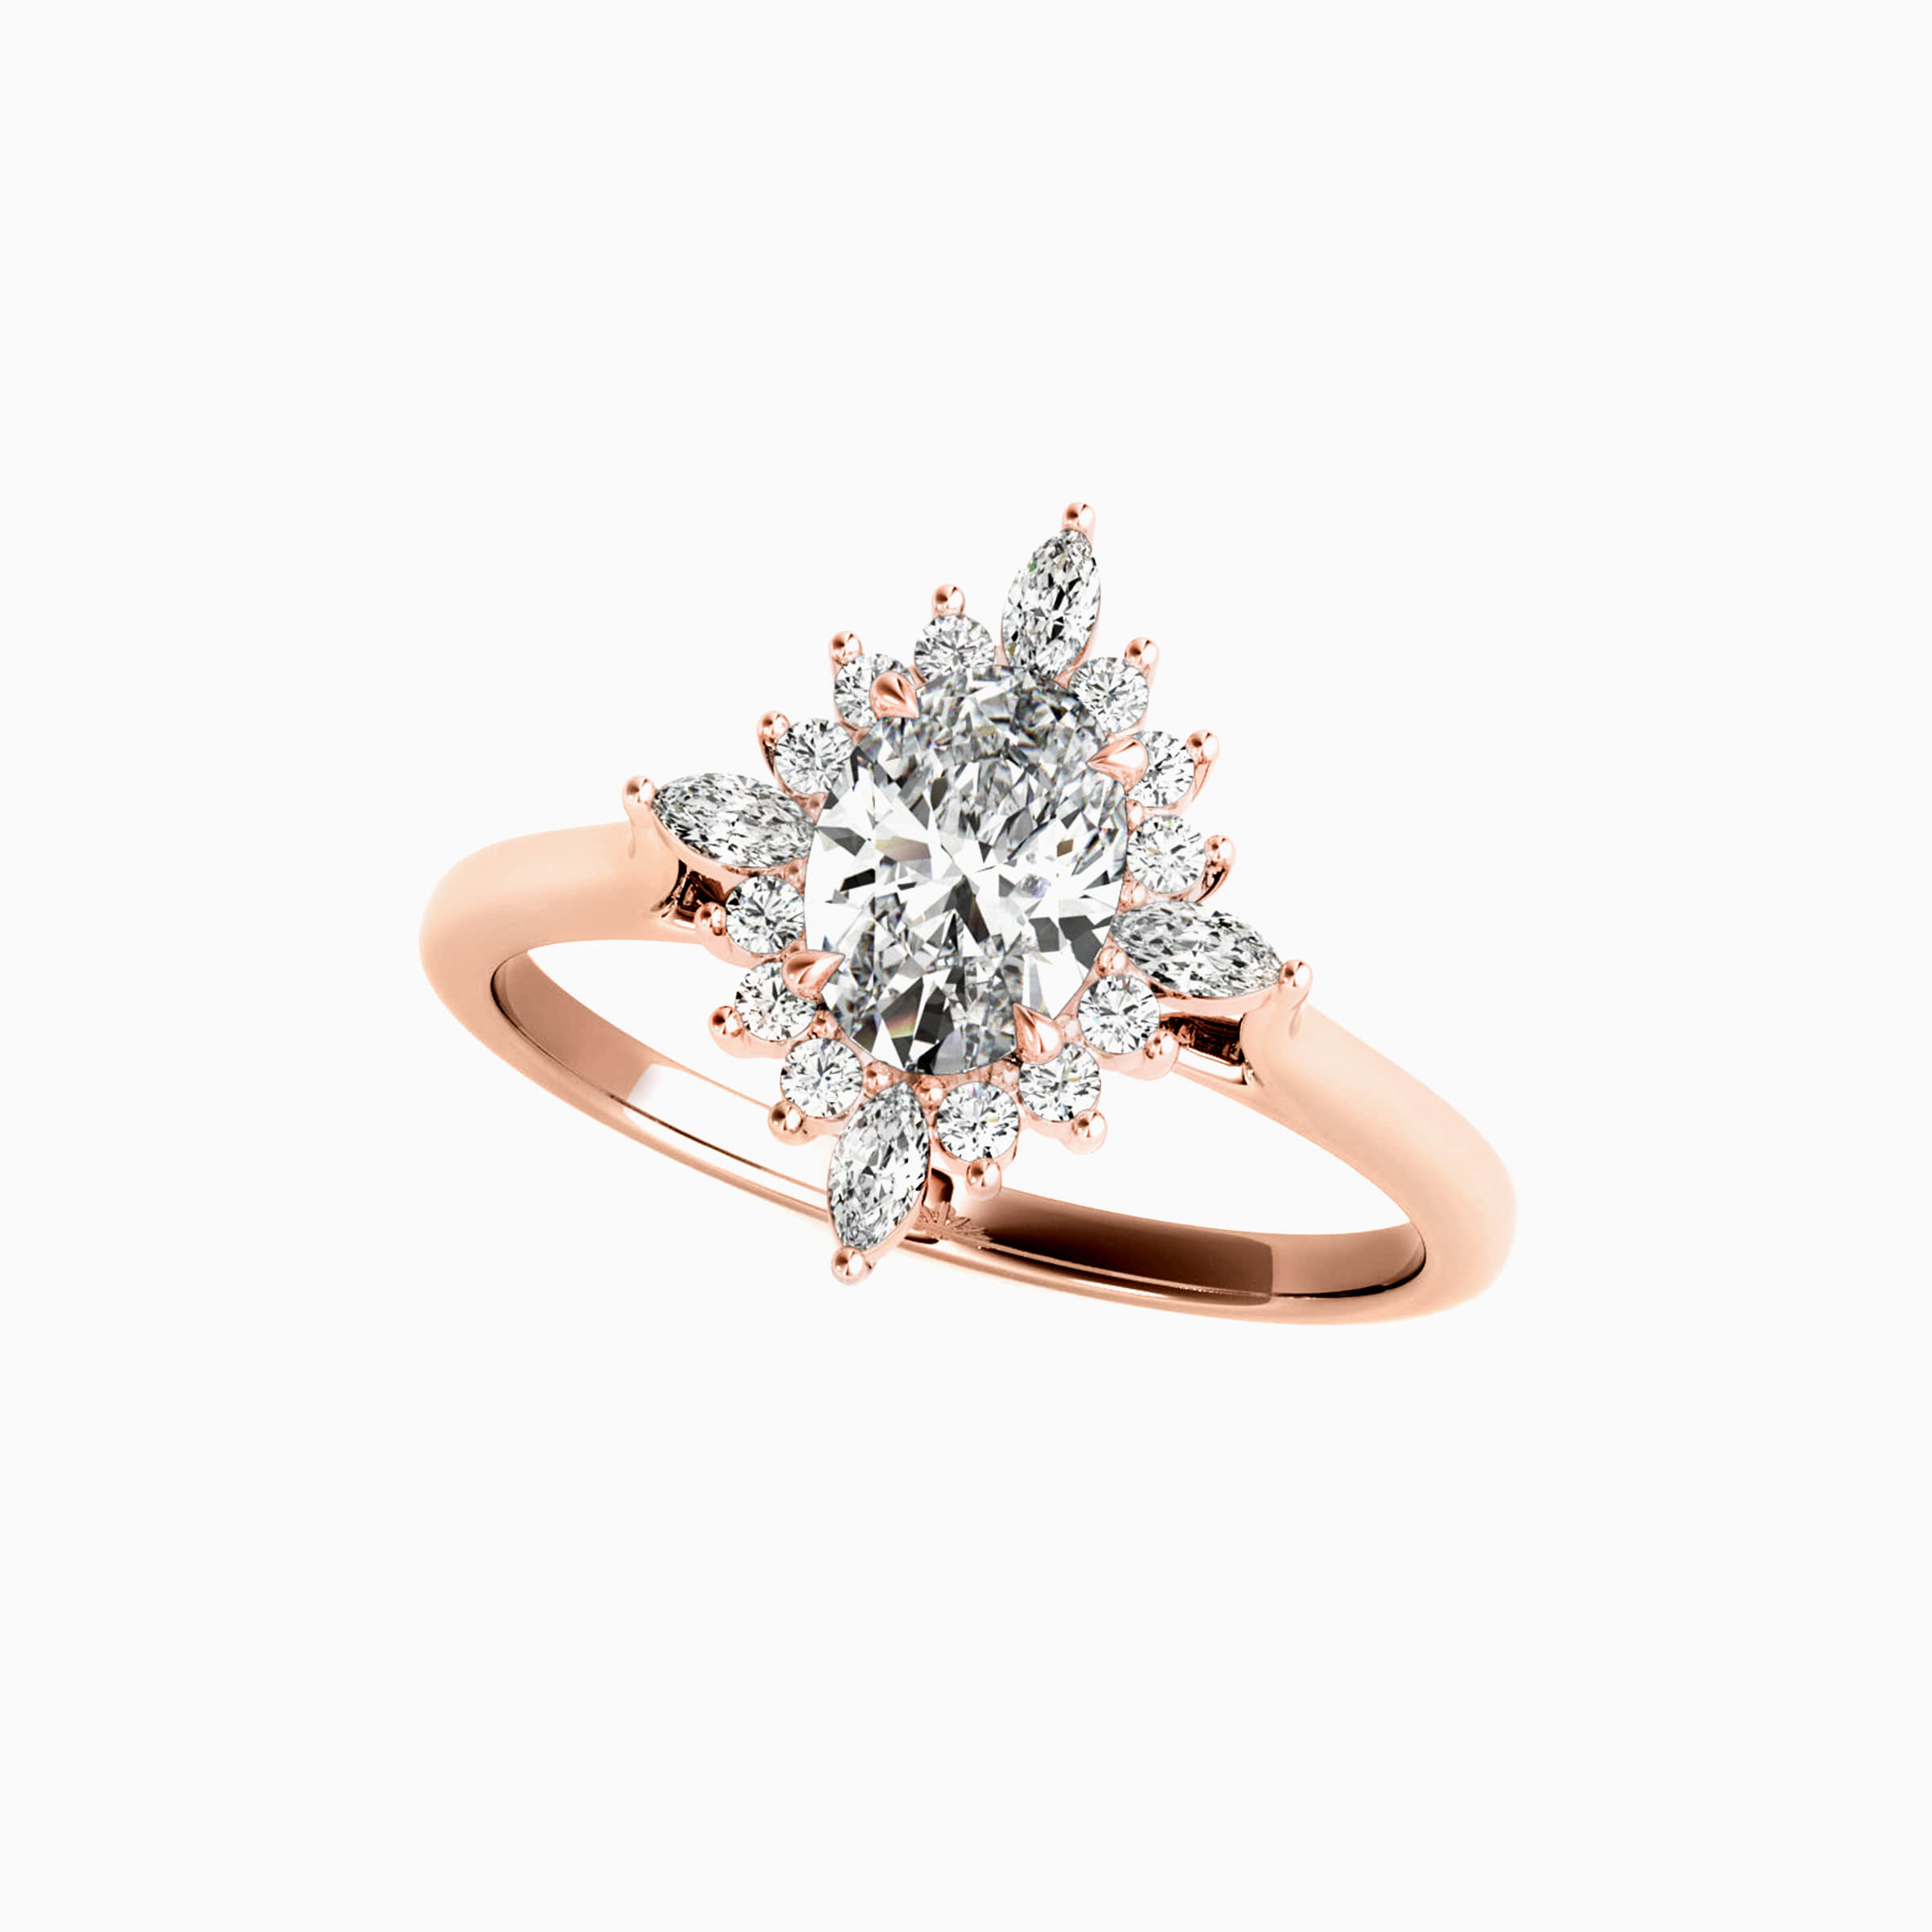 Top 10 Best DR Promise Rings Recommendation - DR Blog